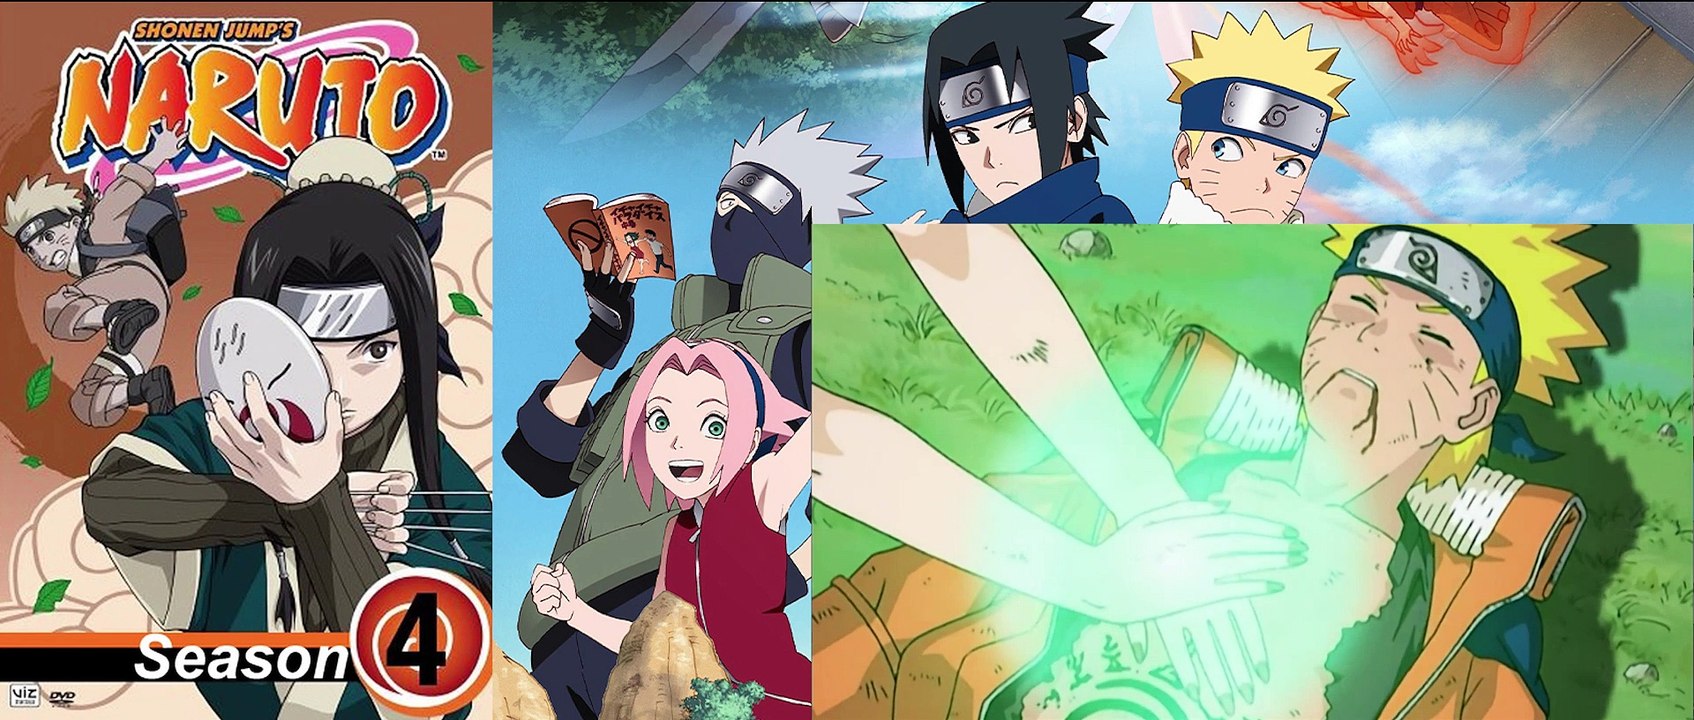 Naruto Season 5 Episode 120 – Roar and Howl! The Ultimate Tag Team In Hindi  - video Dailymotion